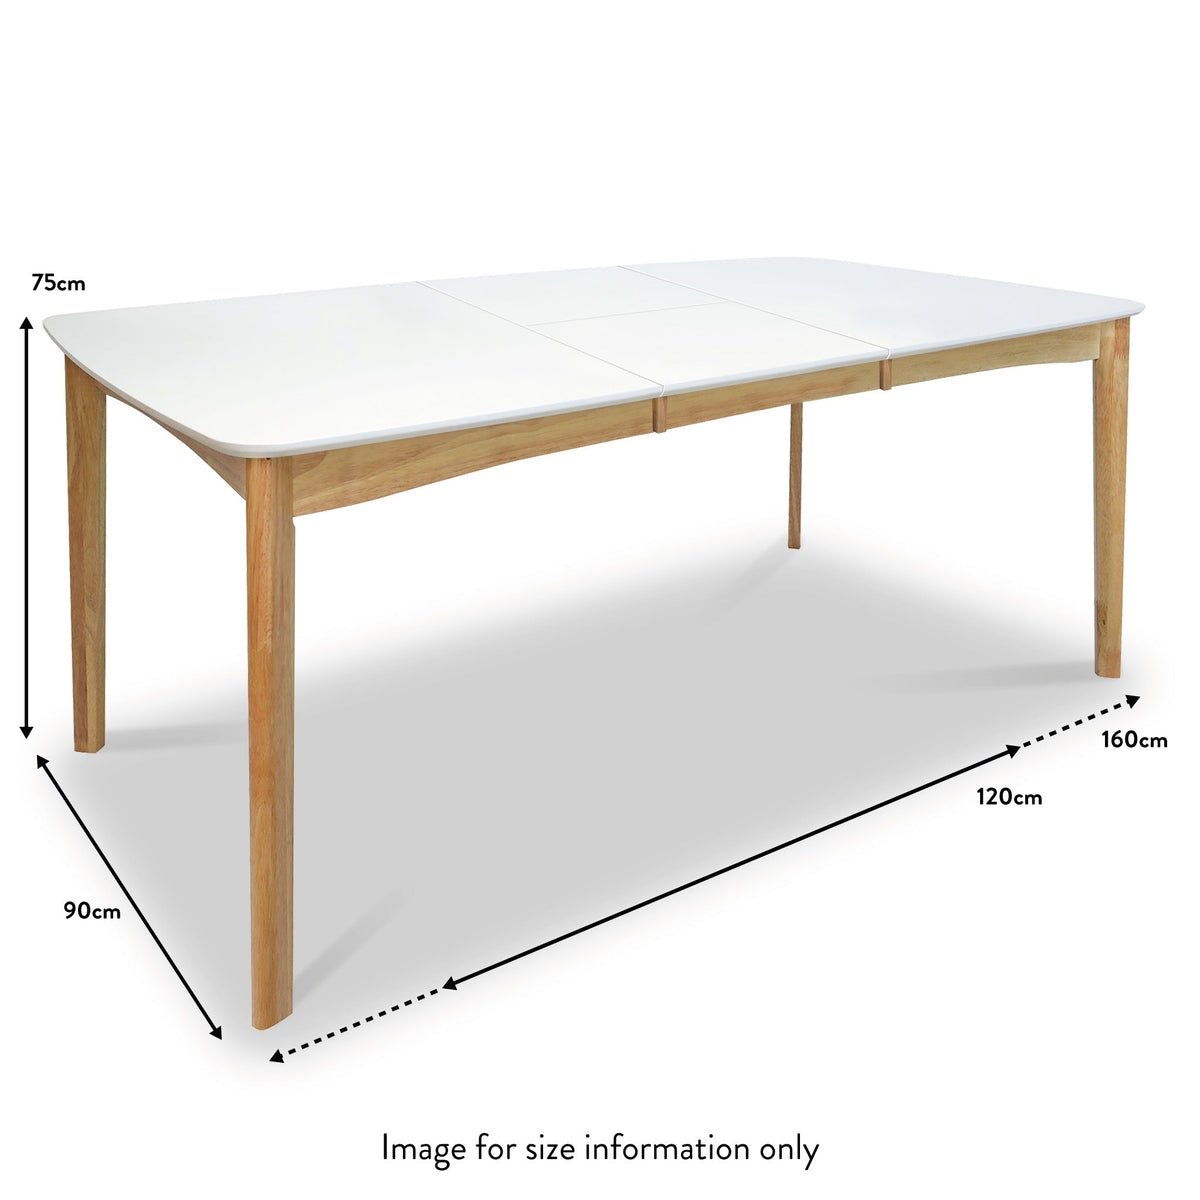 Doncaster White Wooden Extending Rectangular Dining Table dimensions